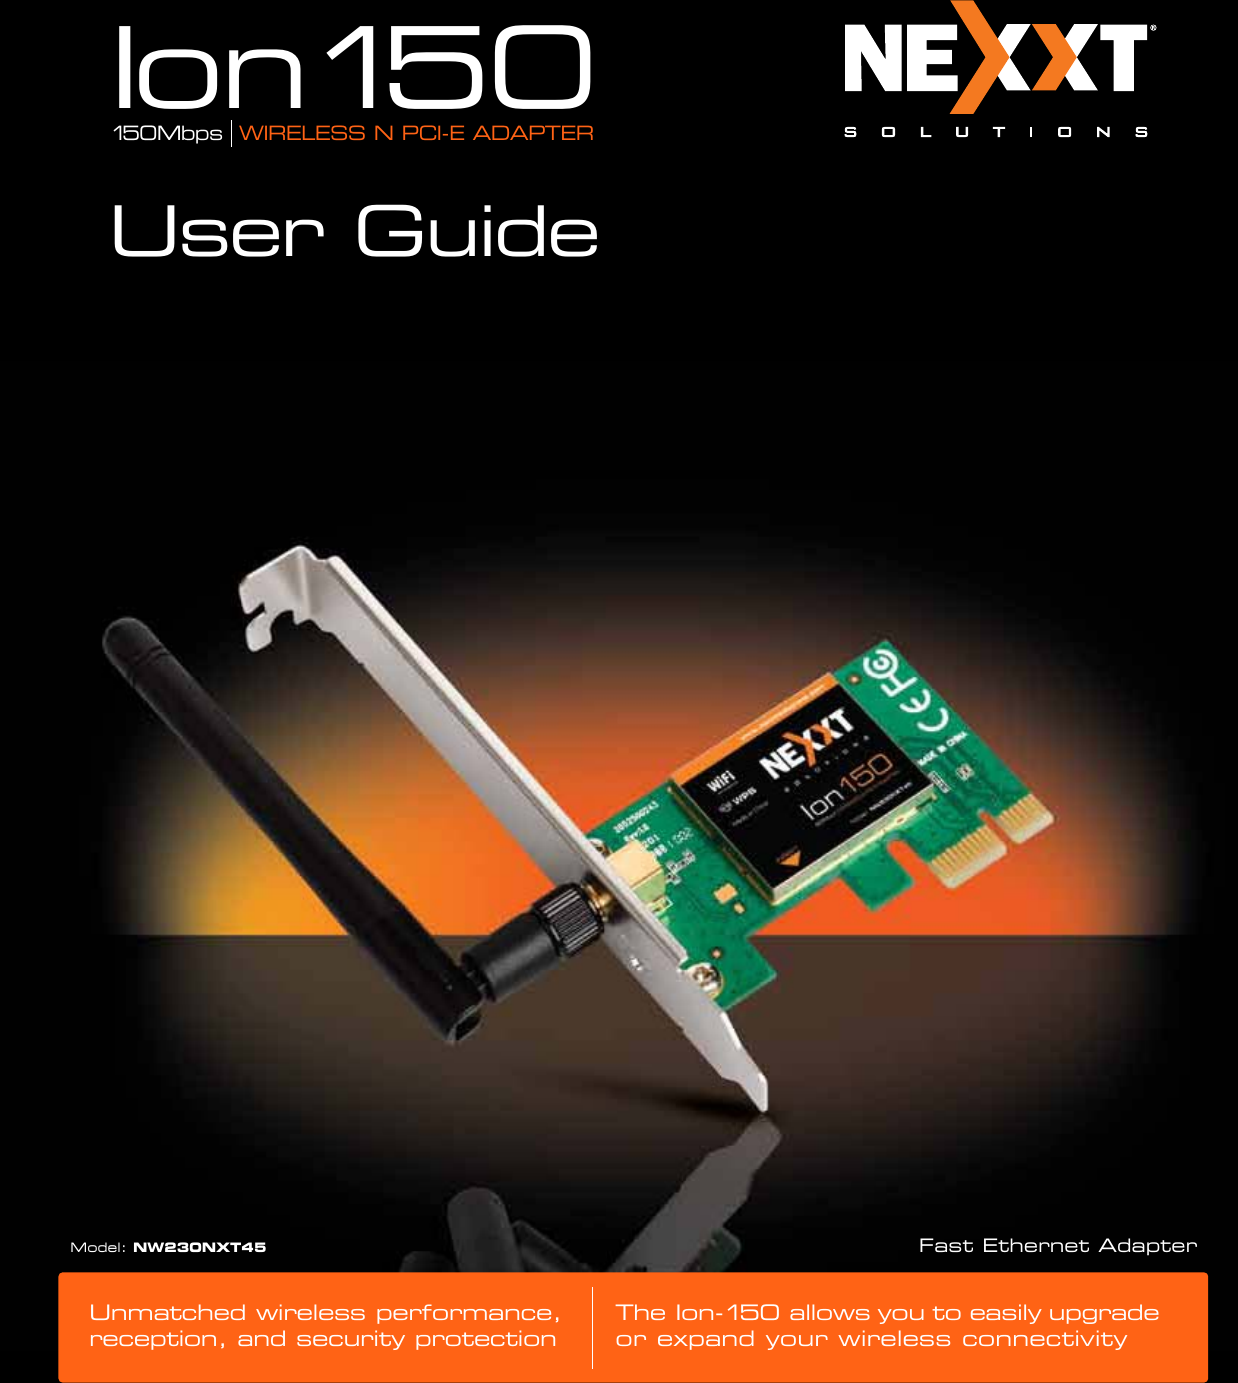 Unmatched wireless performance, reception, and security protection The Ion-150 allows you to easily upgrade or expand your wireless connectivityFast Ethernet AdapterModel: NW230NXT45Ion150150Mbps  WIRELESS N PCI-E ADAPTERUser Guide